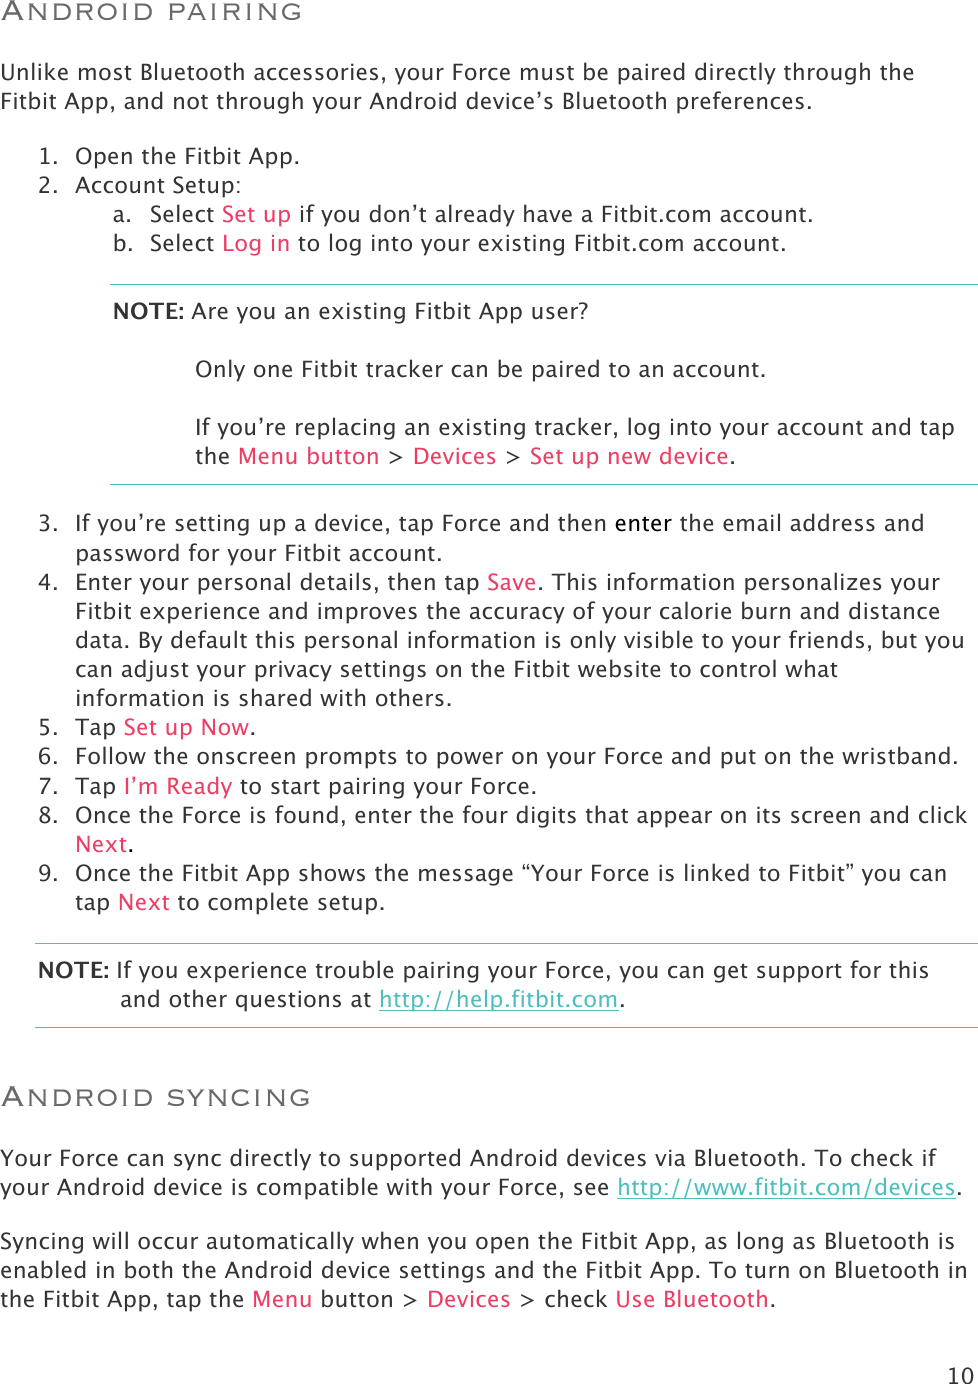 10  Android pairing Unlike most Bluetooth accessories, your Force must be paired directly through the Fitbit App, and not through your Android device’s Bluetooth preferences.  1. Open the Fitbit App. 2. Account Setup: a. Select Set up if you don’t already have a Fitbit.com account. b. Select Log in to log into your existing Fitbit.com account. NOTE: Are you an existing Fitbit App user?   Only one Fitbit tracker can be paired to an account.   If you’re replacing an existing tracker, log into your account and tap the Menu button &gt; Devices &gt; Set up new device.  3. If you’re setting up a device, tap Force and then enter the email address and password for your Fitbit account. 4. Enter your personal details, then tap Save. This information personalizes your Fitbit experience and improves the accuracy of your calorie burn and distance data. By default this personal information is only visible to your friends, but you can adjust your privacy settings on the Fitbit website to control what information is shared with others.  5. Tap Set up Now. 6. Follow the onscreen prompts to power on your Force and put on the wristband.  7. Tap I’m Ready to start pairing your Force.  8. Once the Force is found, enter the four digits that appear on its screen and click Next.  9. Once the Fitbit App shows the message “Your Force is linked to Fitbit” you can tap Next to complete setup. NOTE: If you experience trouble pairing your Force, you can get support for this and other questions at http://help.fitbit.com. Android syncing Your Force can sync directly to supported Android devices via Bluetooth. To check if your Android device is compatible with your Force, see http://www.fitbit.com/devices.  Syncing will occur automatically when you open the Fitbit App, as long as Bluetooth is enabled in both the Android device settings and the Fitbit App. To turn on Bluetooth in the Fitbit App, tap the Menu button &gt; Devices &gt; check Use Bluetooth. 